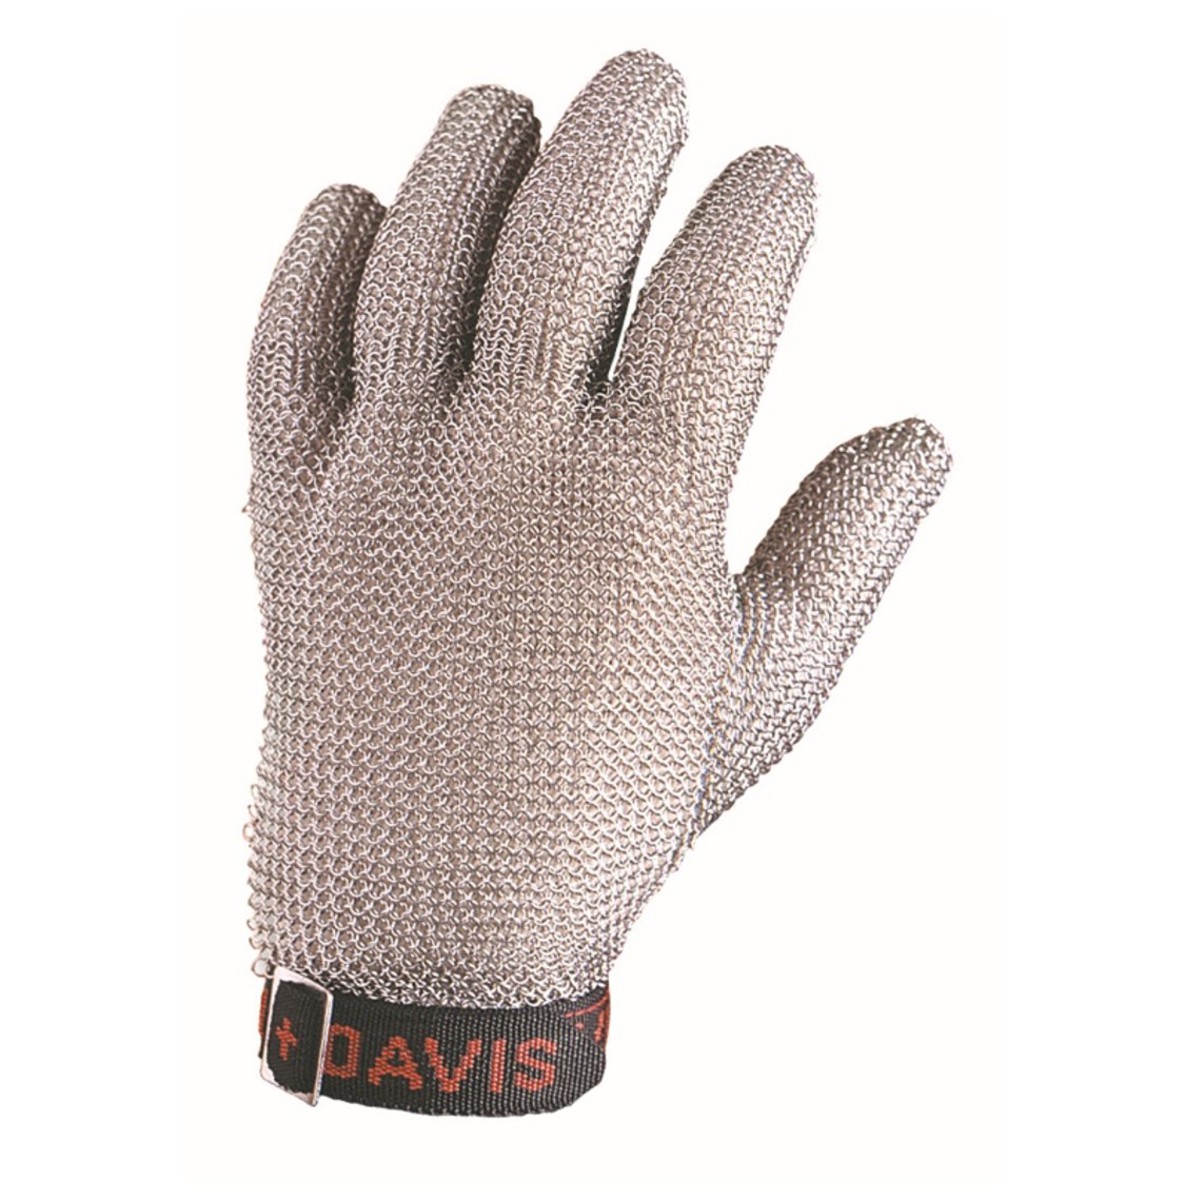 Honeywell X-Large Whiting + Davis® 0.609 lb Stainless Steel Cut Resistant Gloves